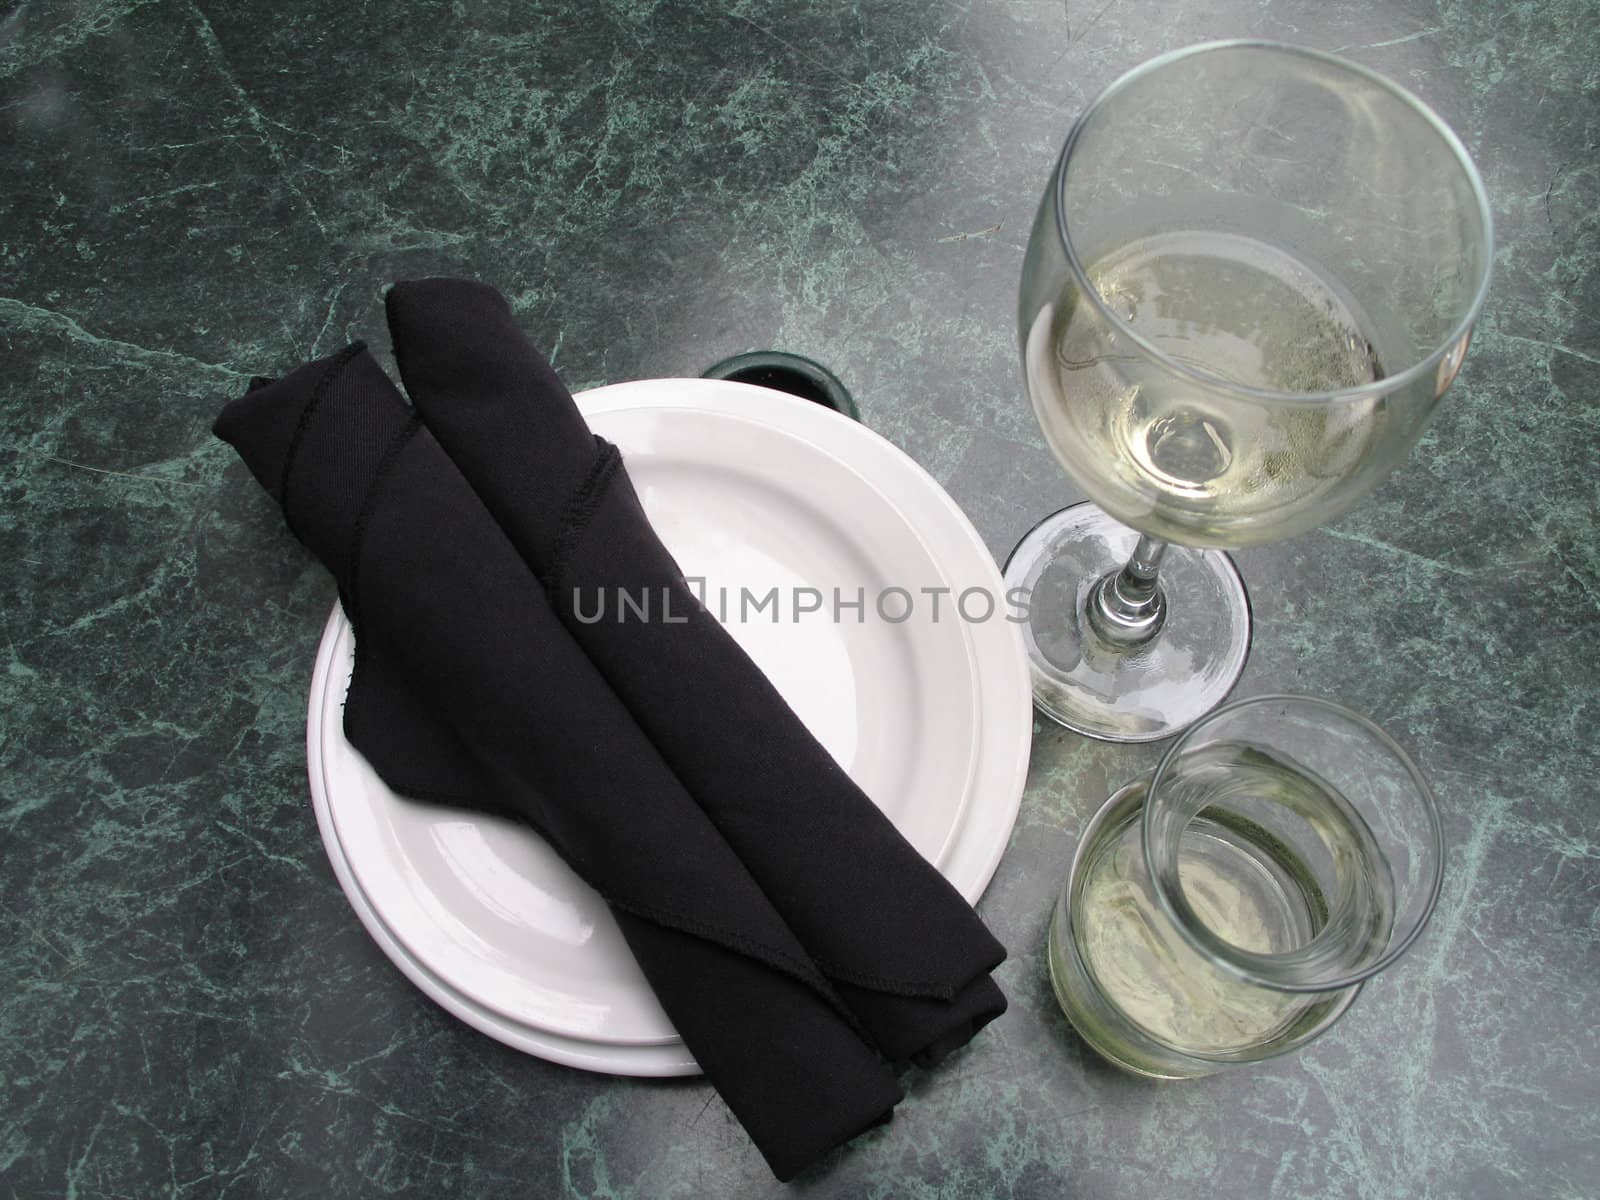 table setting with wine